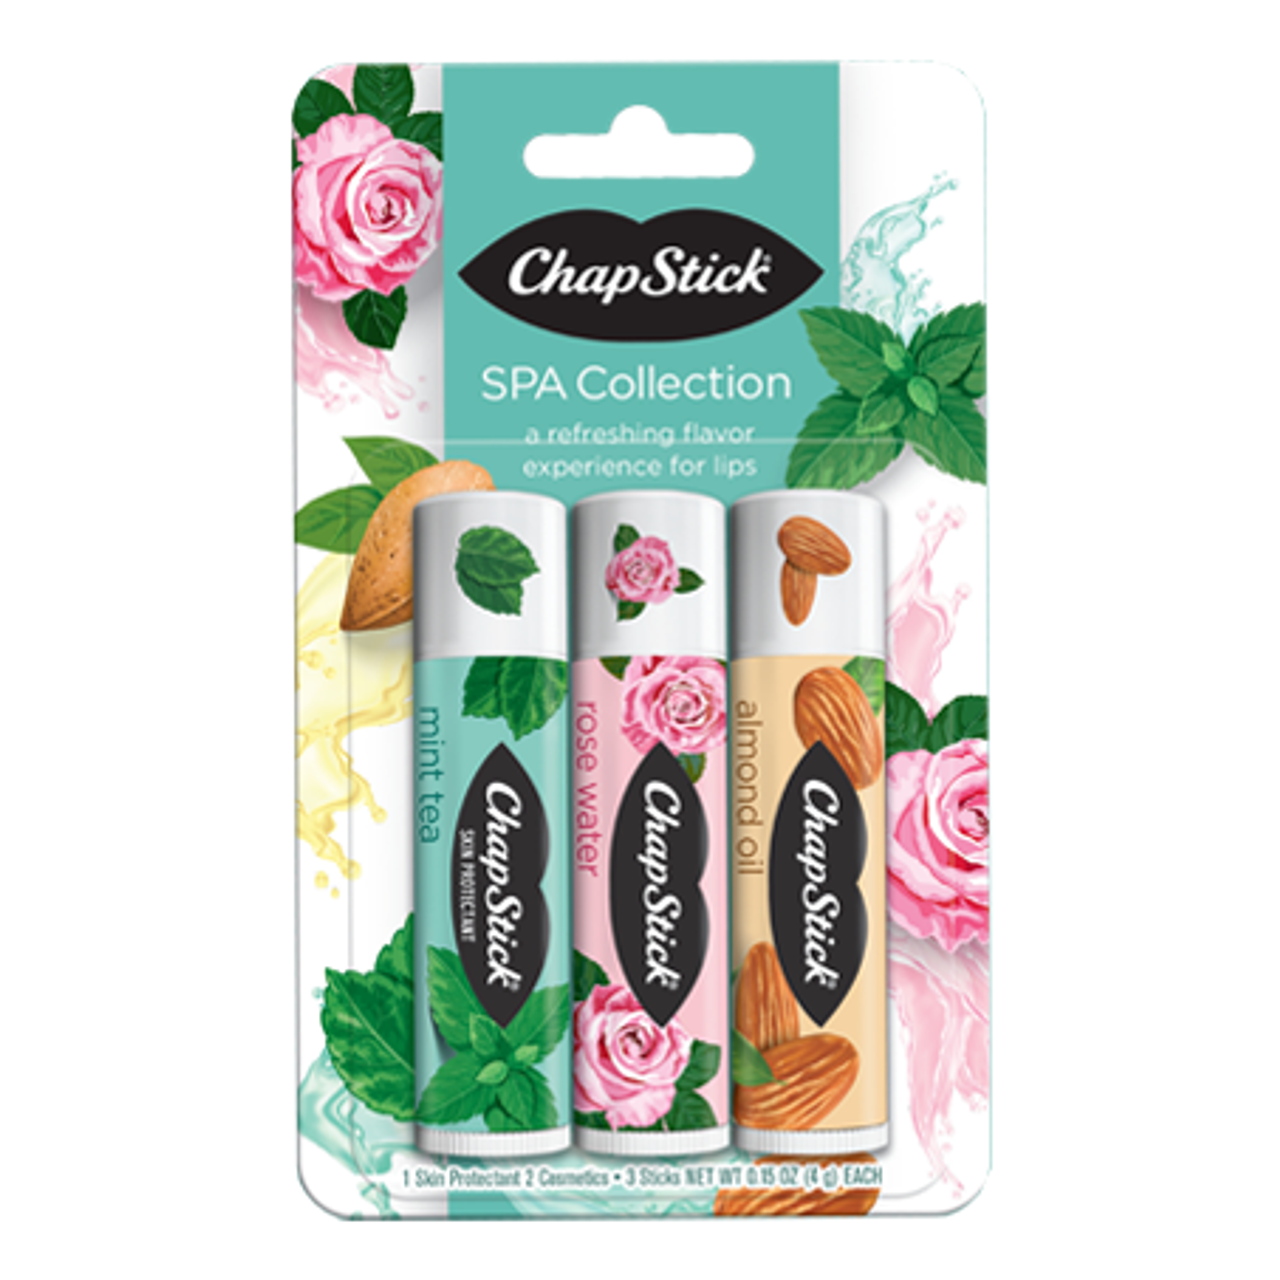 ChapStick® Spa Collection three 0.15oz tubes pack.